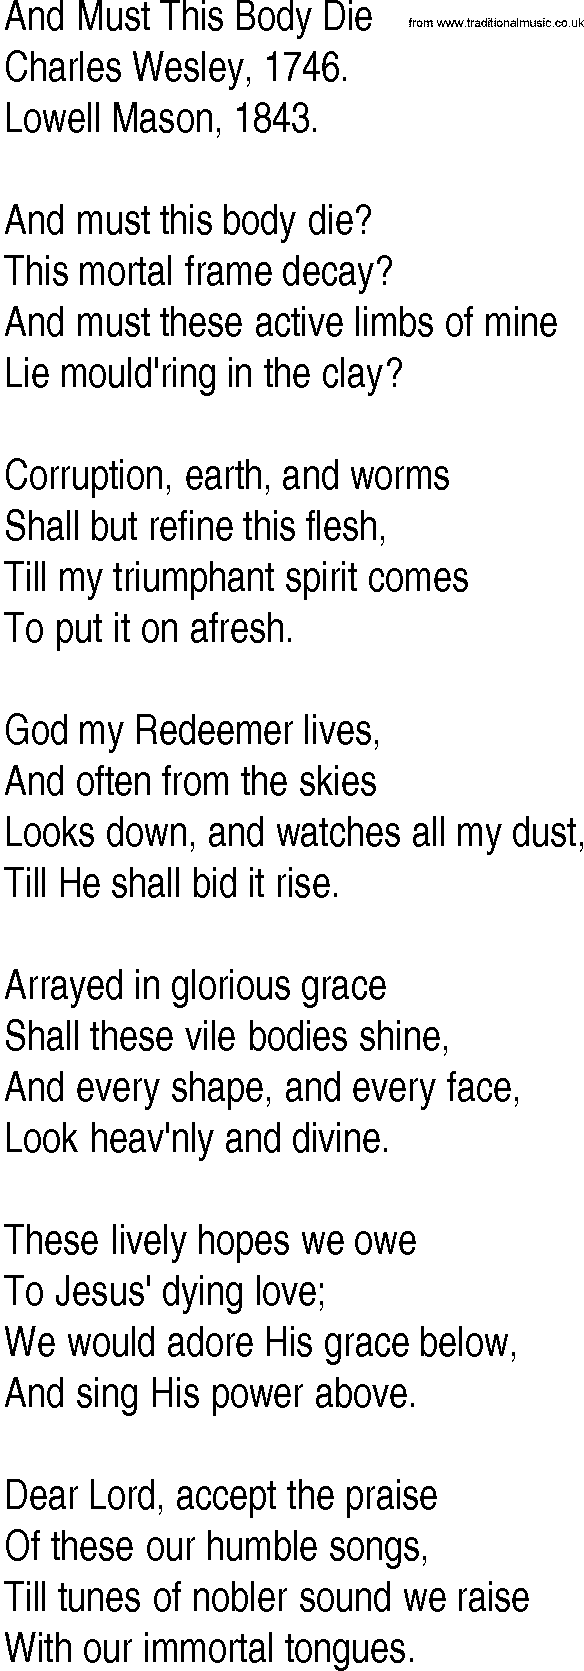 Hymn and Gospel Song: And Must This Body Die by Charles Wesley lyrics